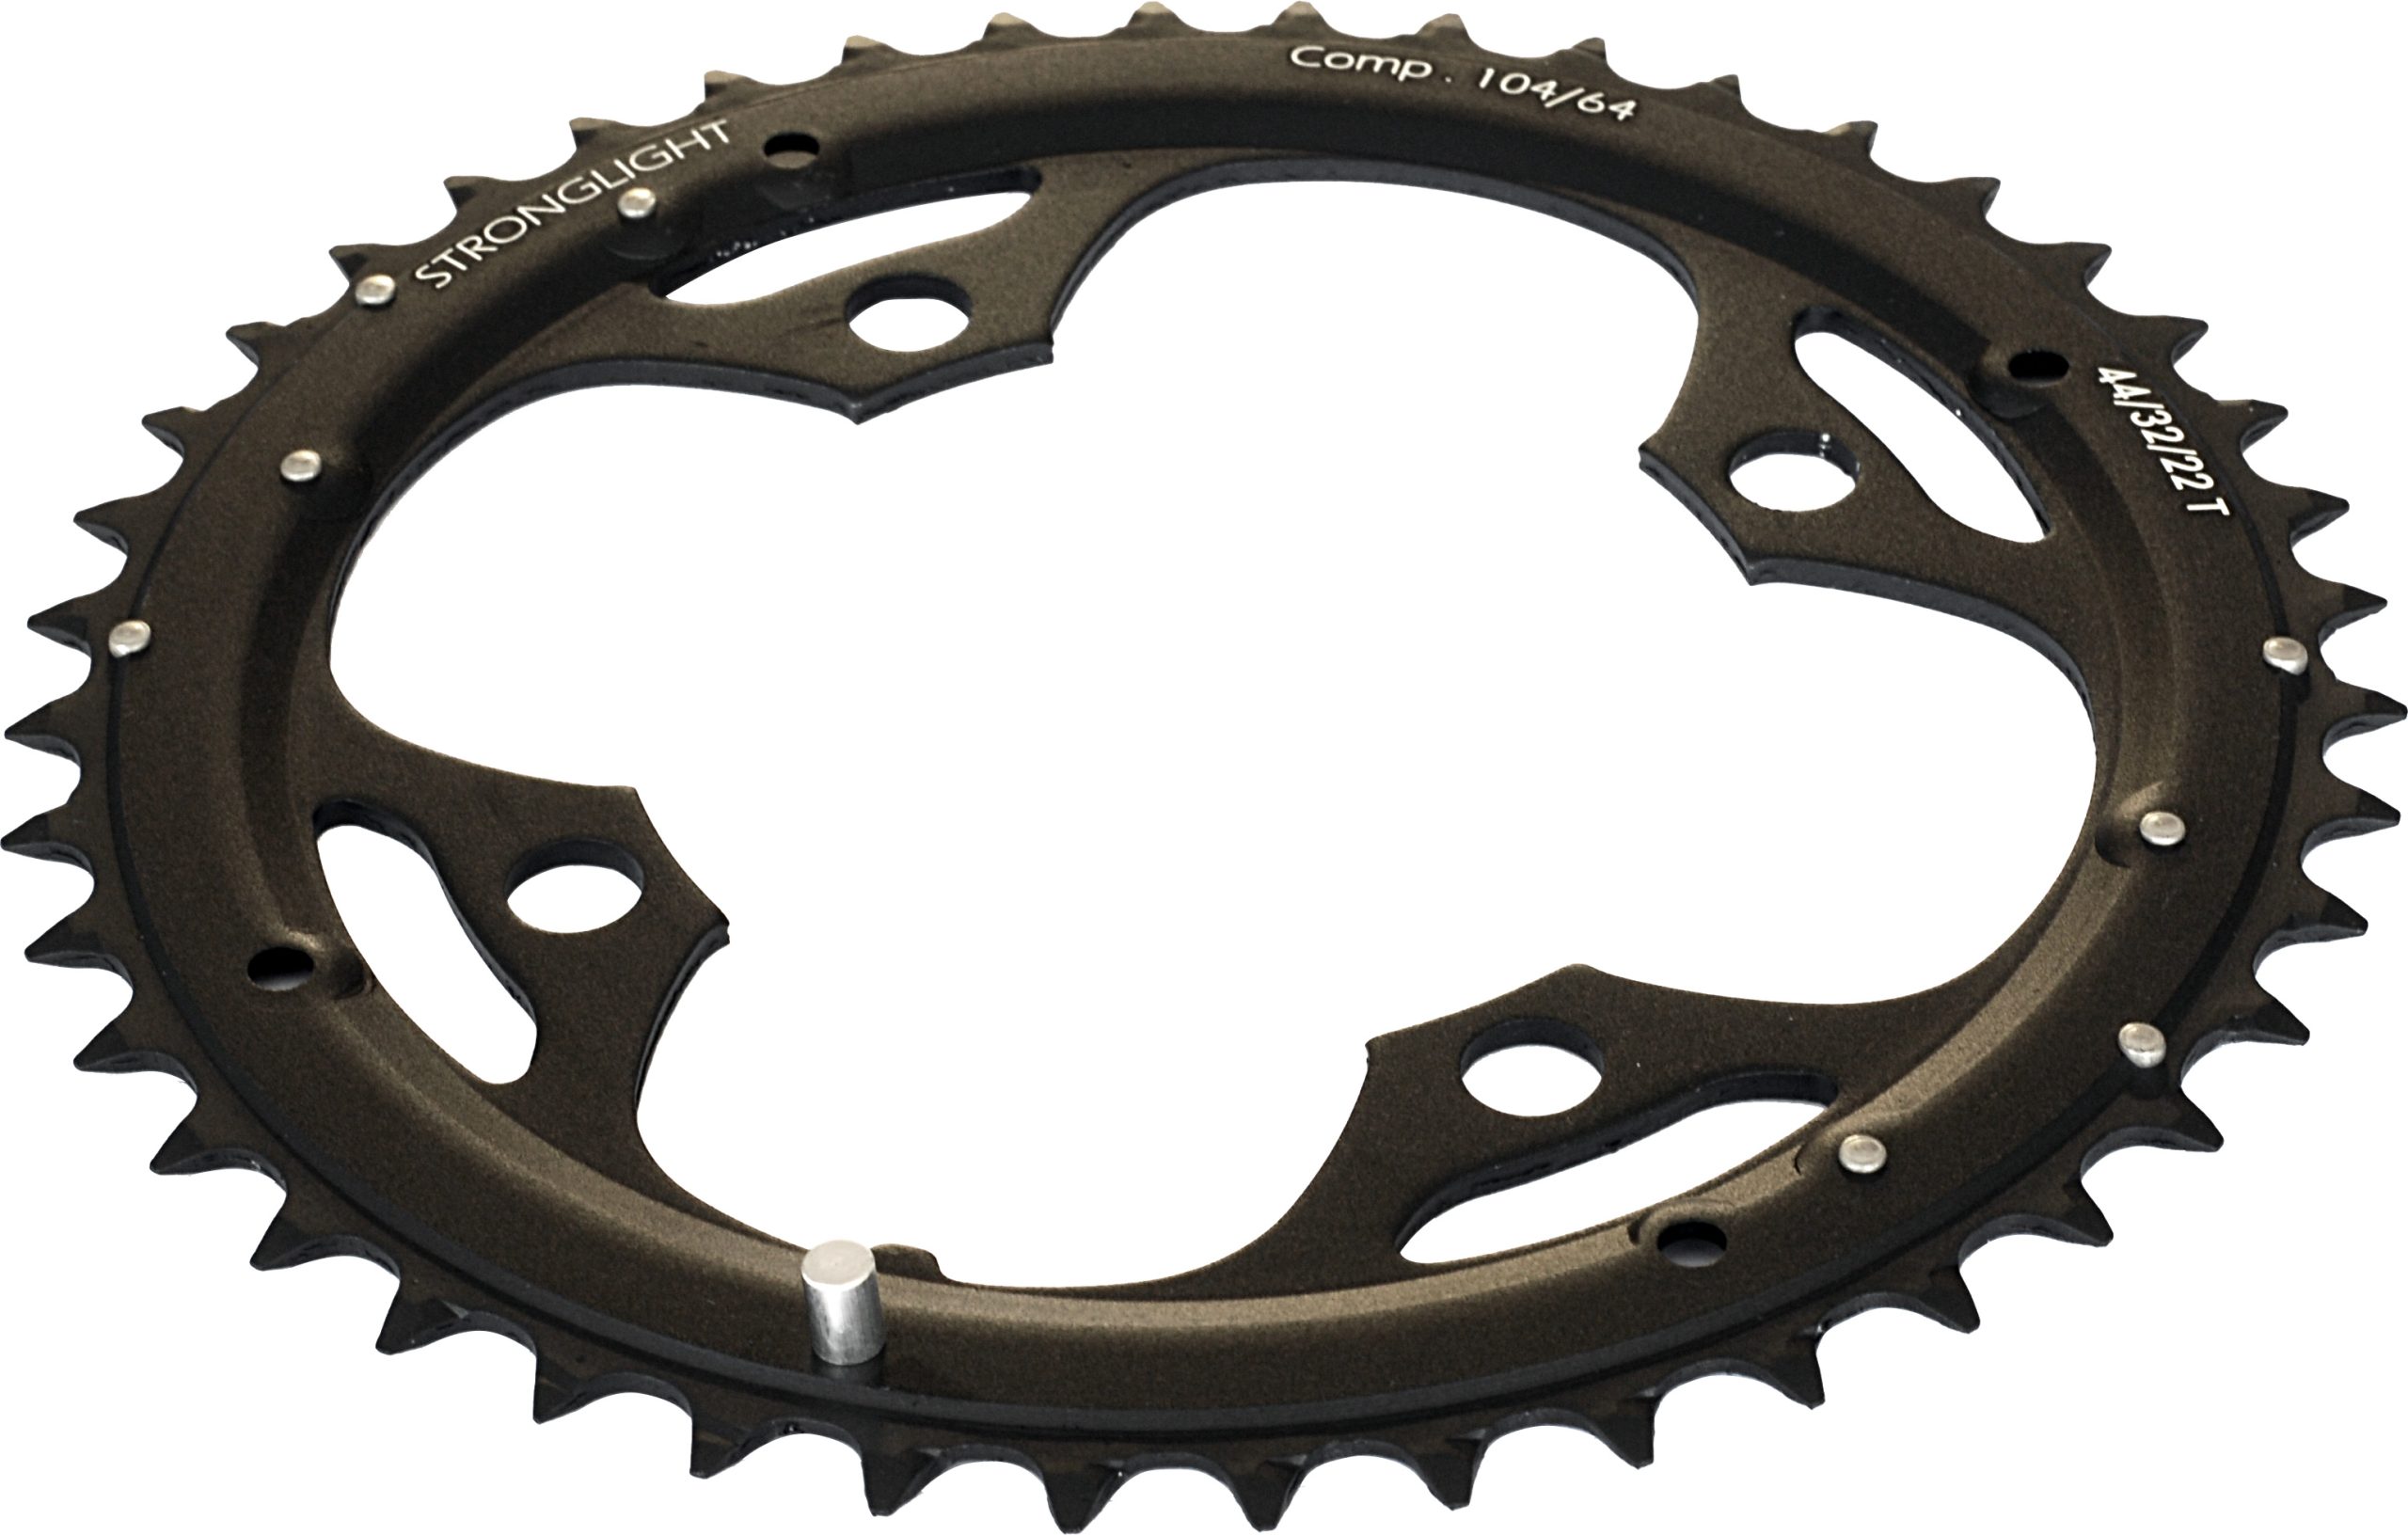 RXC104Z32 Stronglight 32T 4-Arm/104mm Chainring